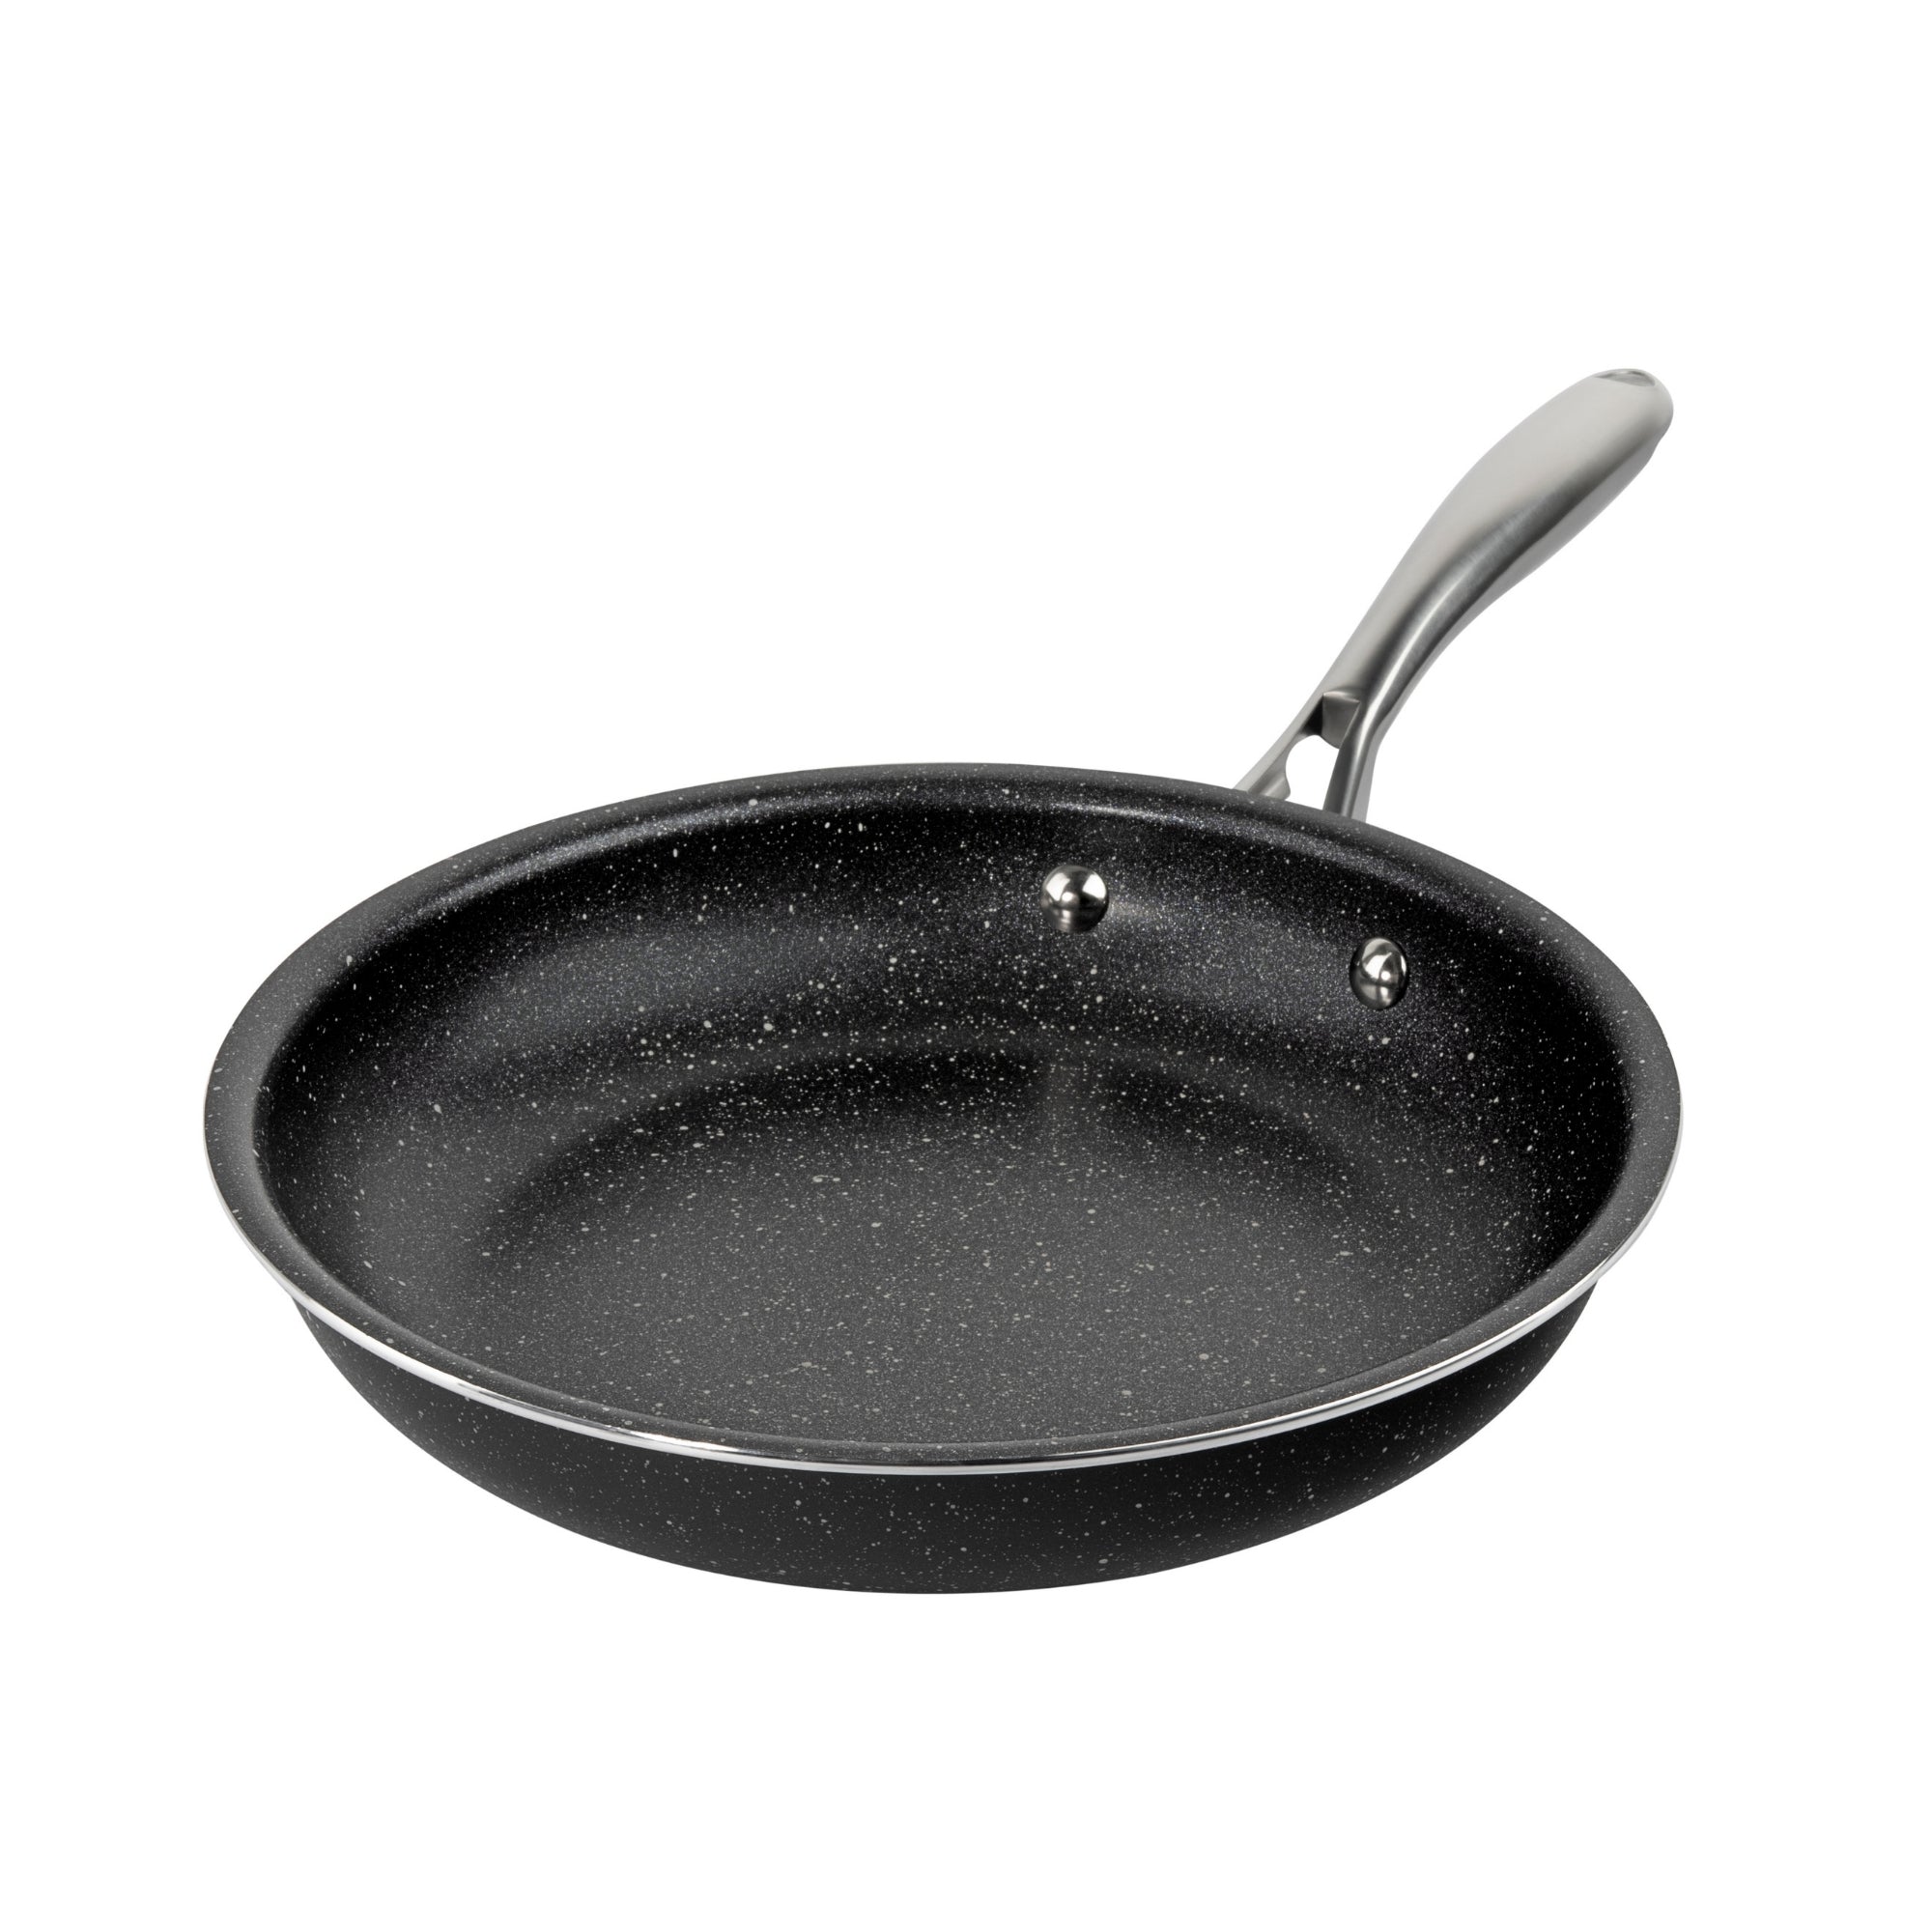 DYNAMIC TEFLON COATED NONSTICK FRY PAN 8 INCH - US Foods CHEF'STORE